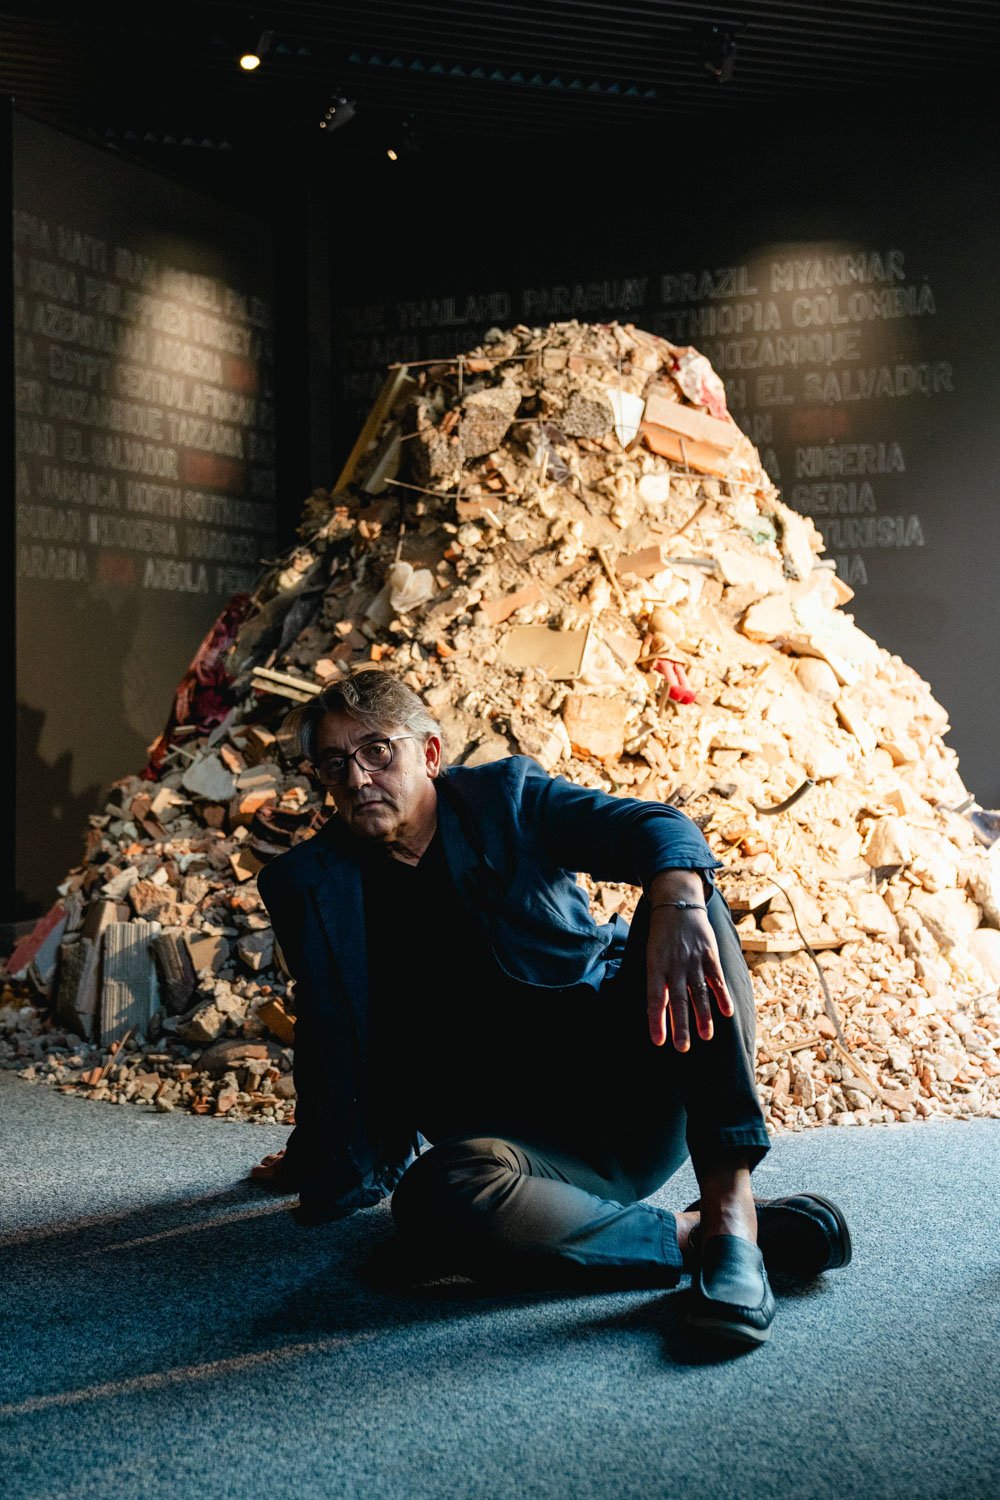 Antonello Diodato Guardigli (a.k.a. ADG) with his resentations at the 2024 Venice Biennale. He does so in the Grenada Pavilion with a site-specific installation entitled "Oltre" (translated into English as "Beyond"): debris and rubble, in which the centrality of "relationship" will be a fundamental prerequisite for both individual and collective growth.